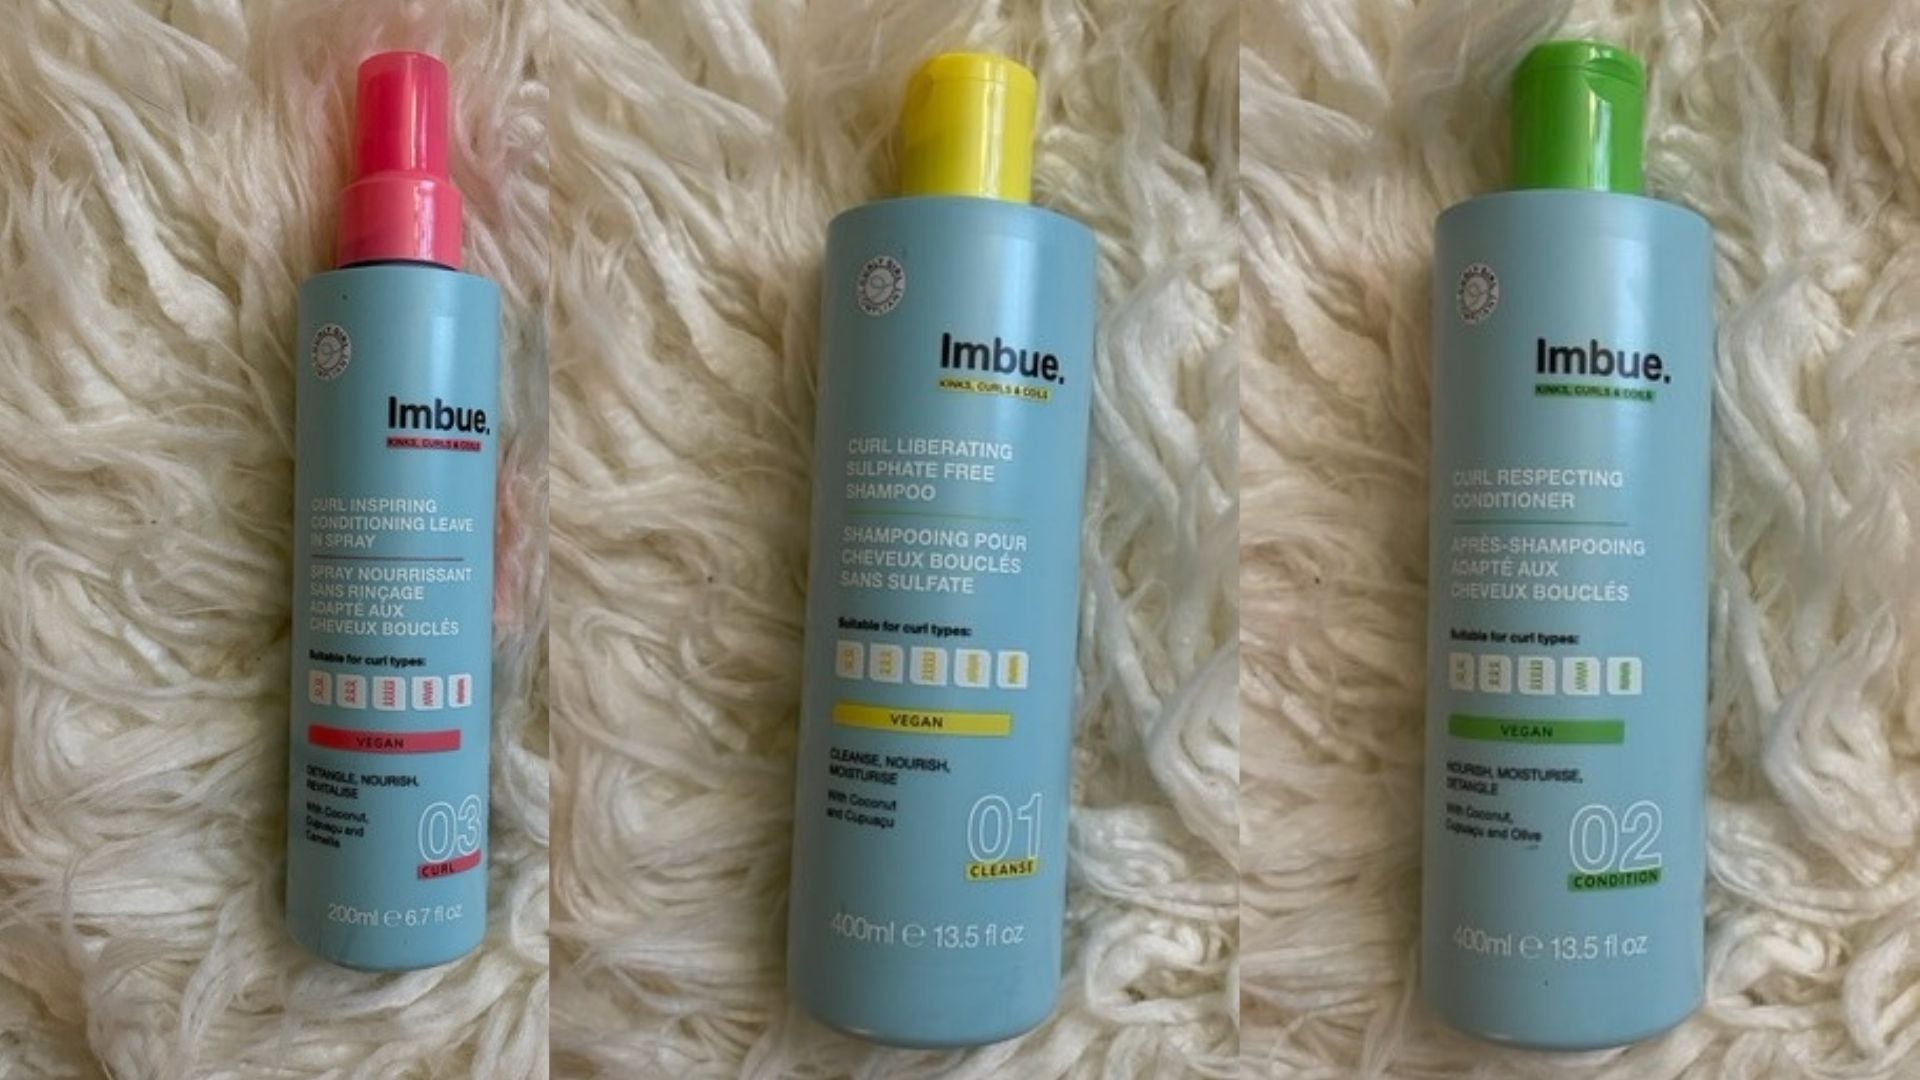 review, photos, ingredients, trends, hair care, 2021, 2022, imbue, curl liberating shampoo, sulphate free, curly girl compliant, vegan hair care, silicone free, curl inspiring conditioning leave-in spray, curl respecting conditioner